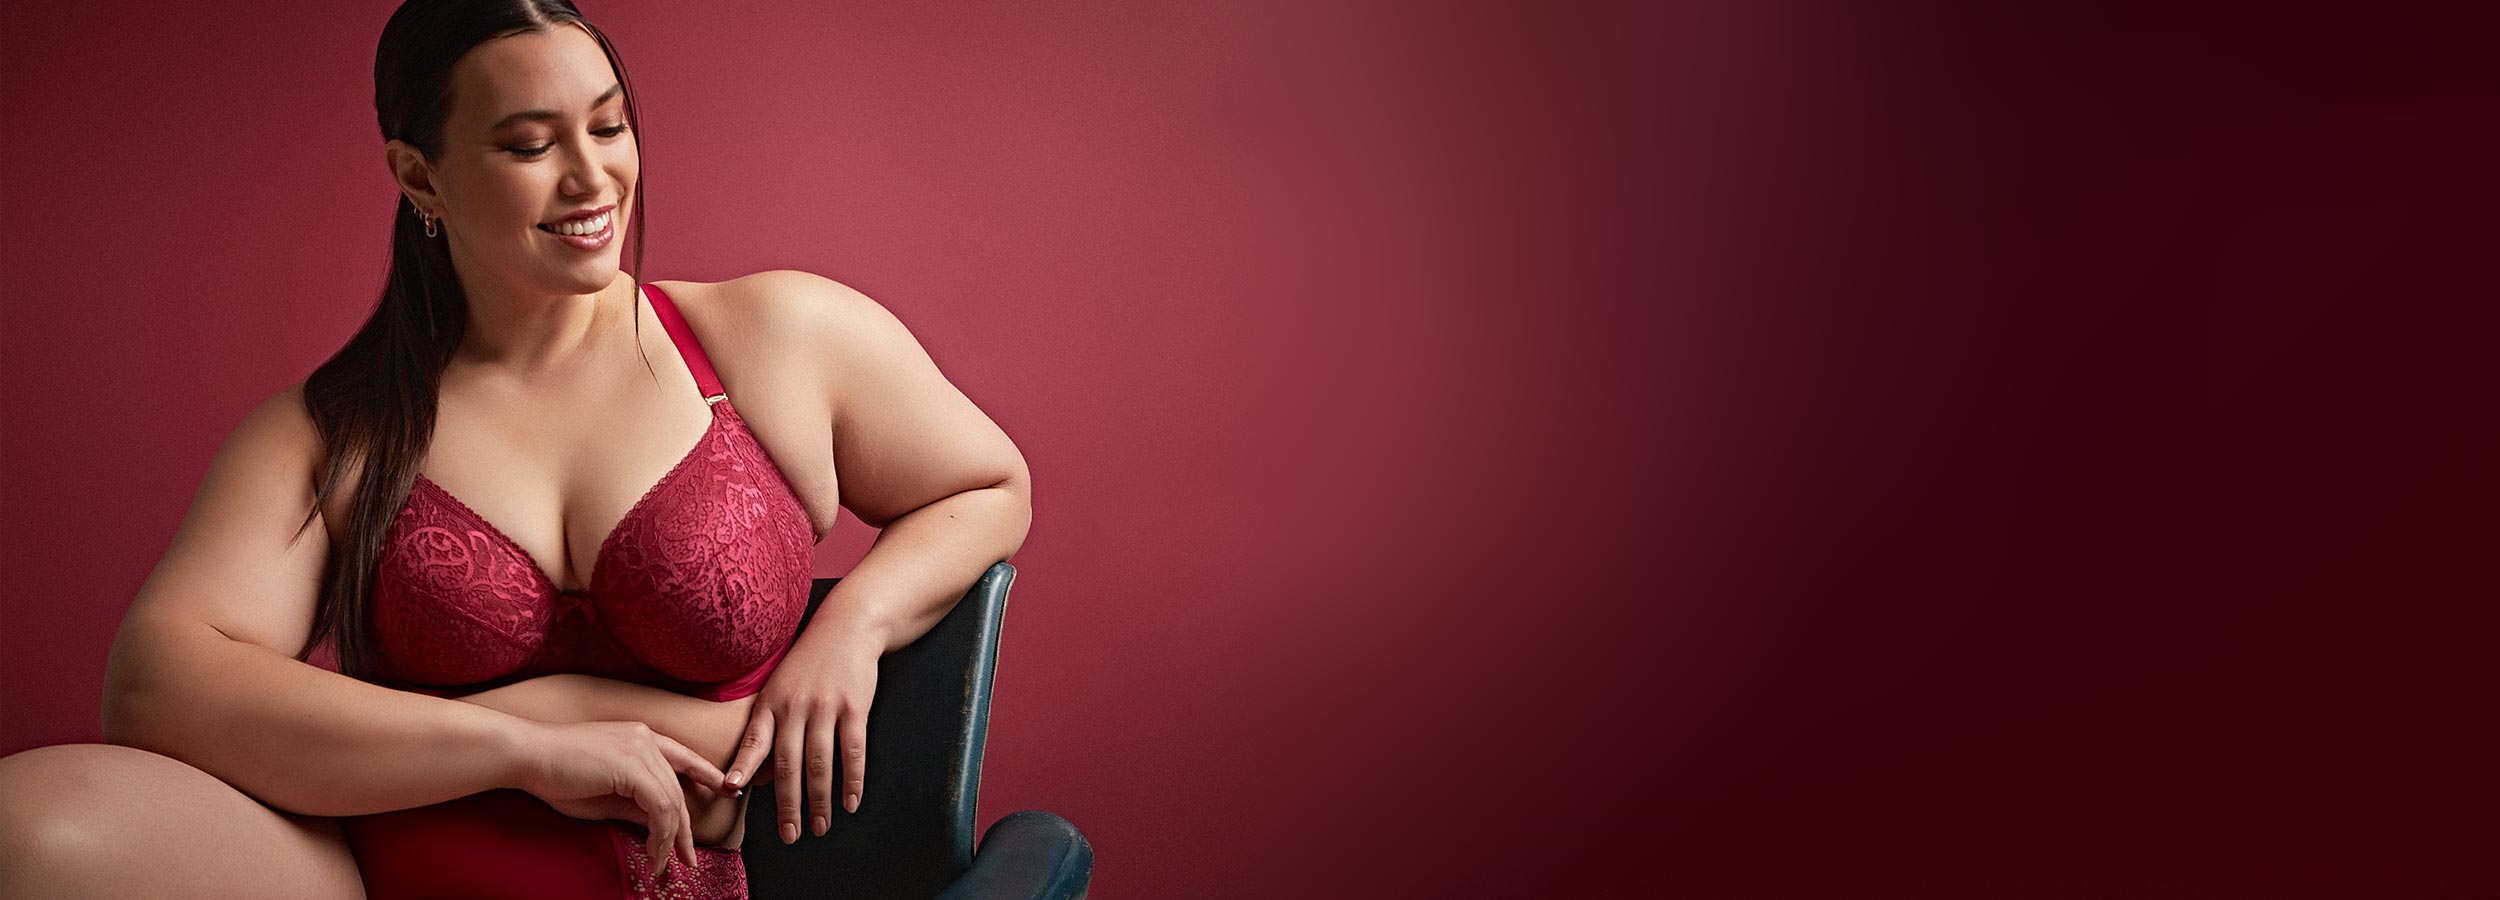 Woman sitting on chair in red plus size lingerie